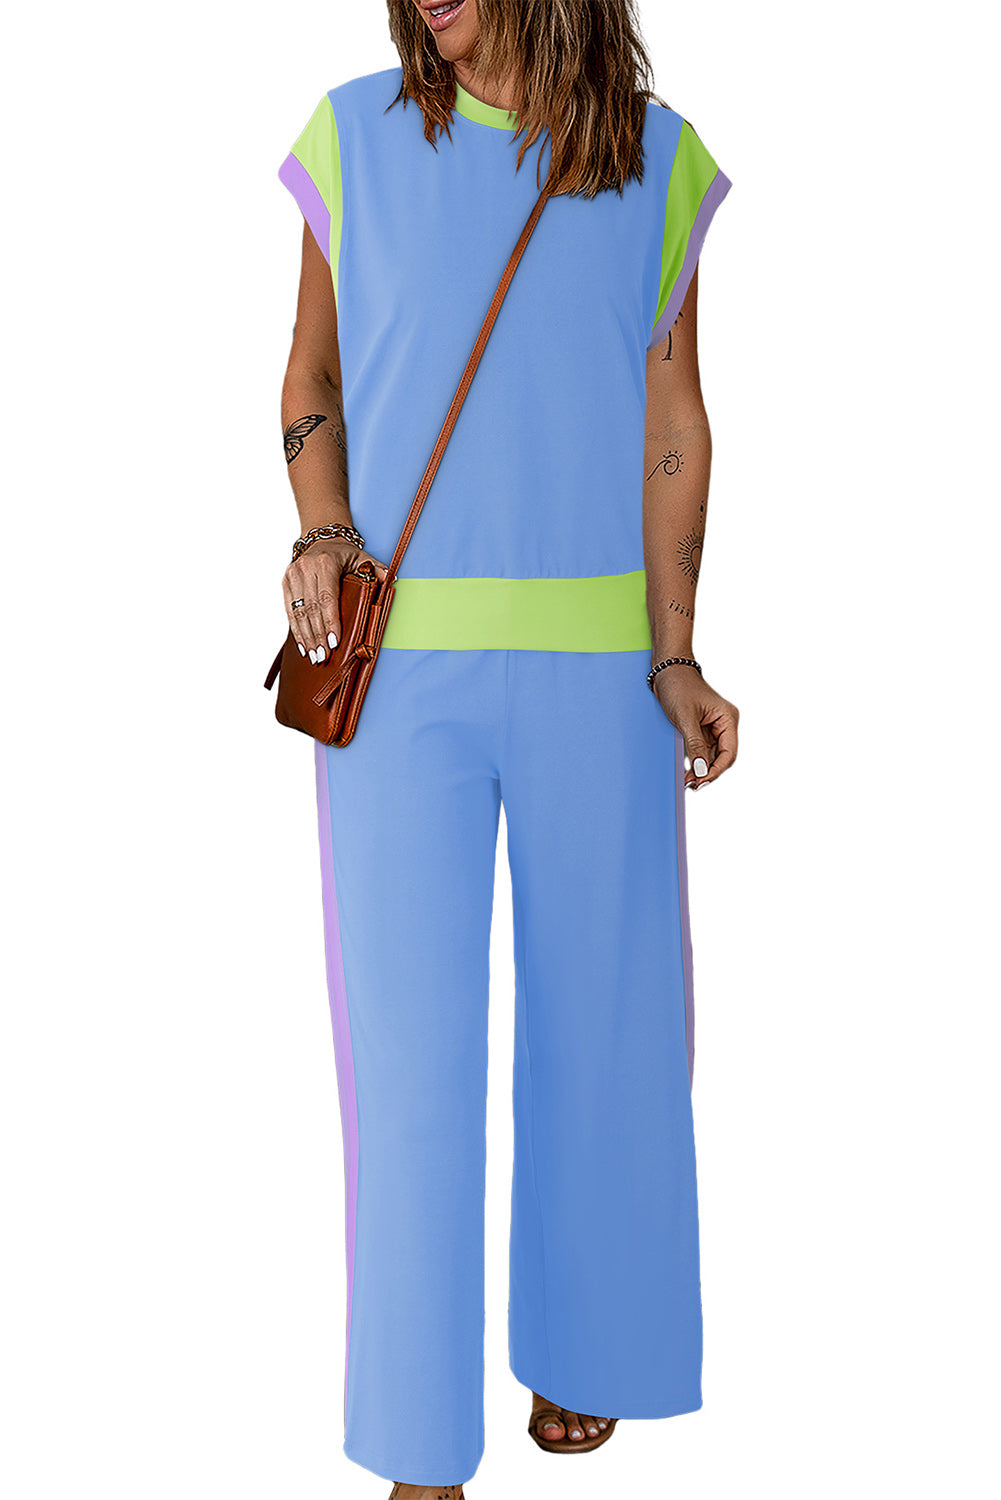 Sky Blue Color Block Detail Casual Two-piece Outfit Jumpsuits & Rompers JT's Designer Fashion